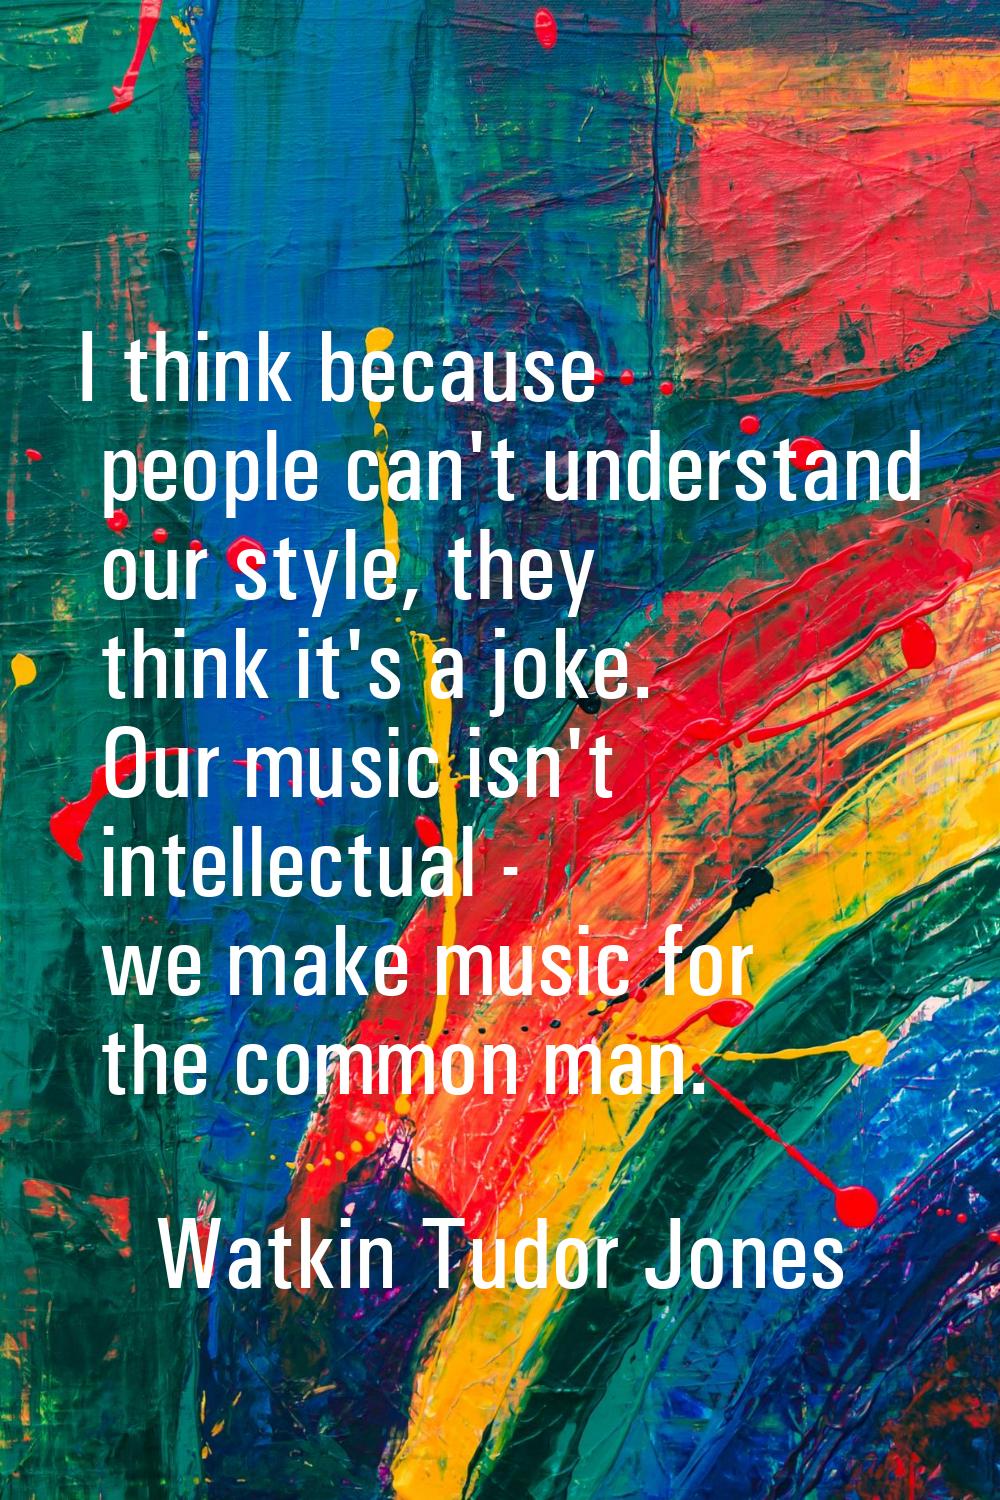 I think because people can't understand our style, they think it's a joke. Our music isn't intellec